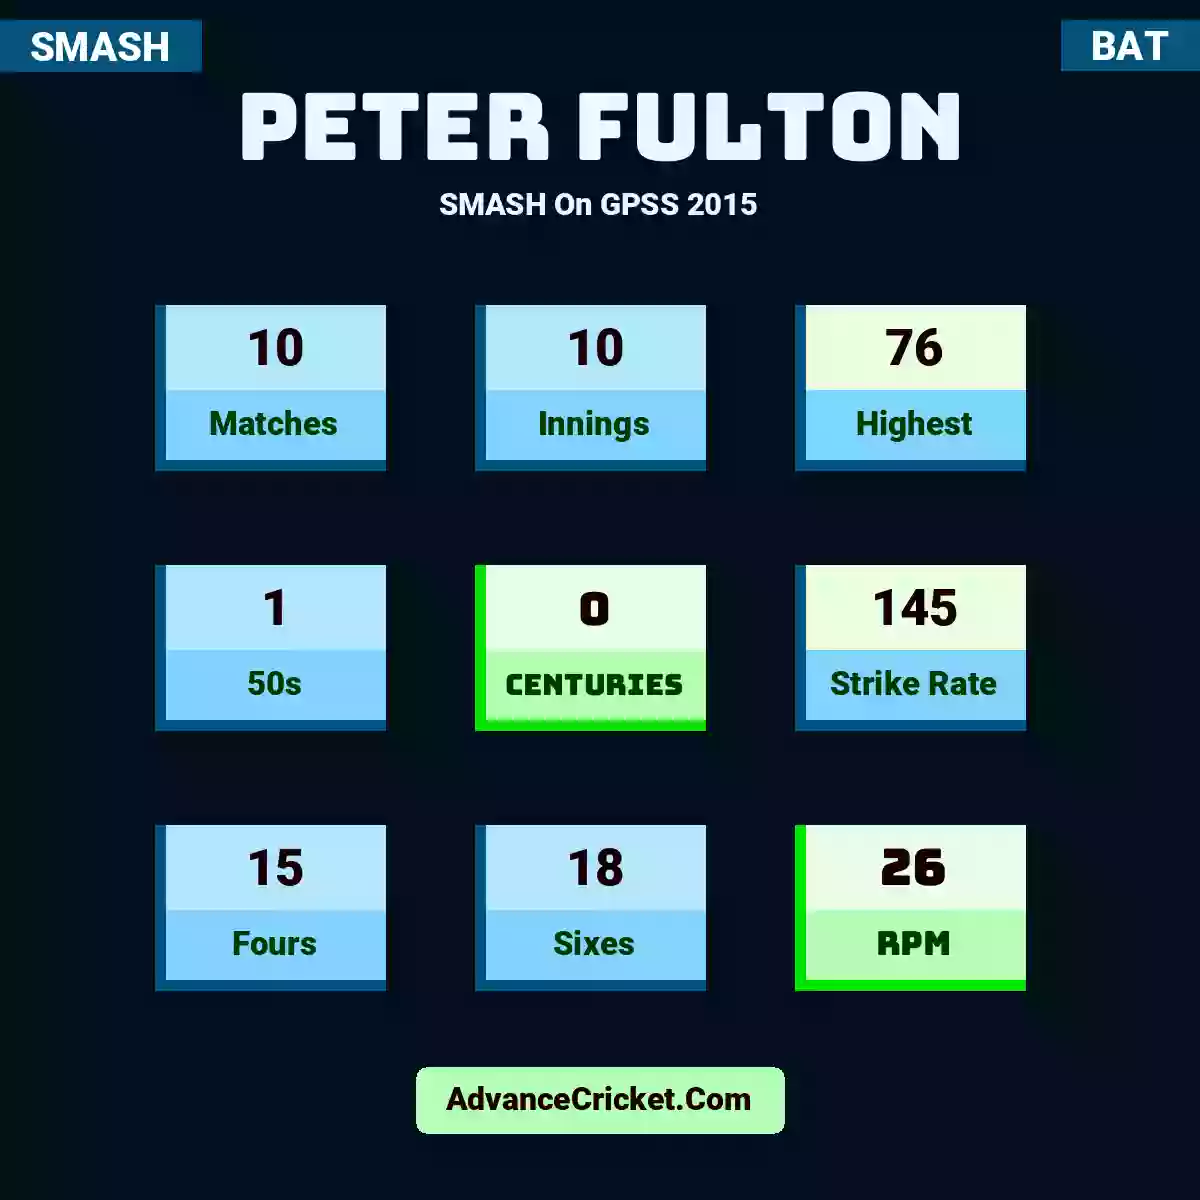 Peter Fulton SMASH  On GPSS 2015, Peter Fulton played 10 matches, scored 76 runs as highest, 1 half-centuries, and 0 centuries, with a strike rate of 145. P.Fulton hit 15 fours and 18 sixes, with an RPM of 26.